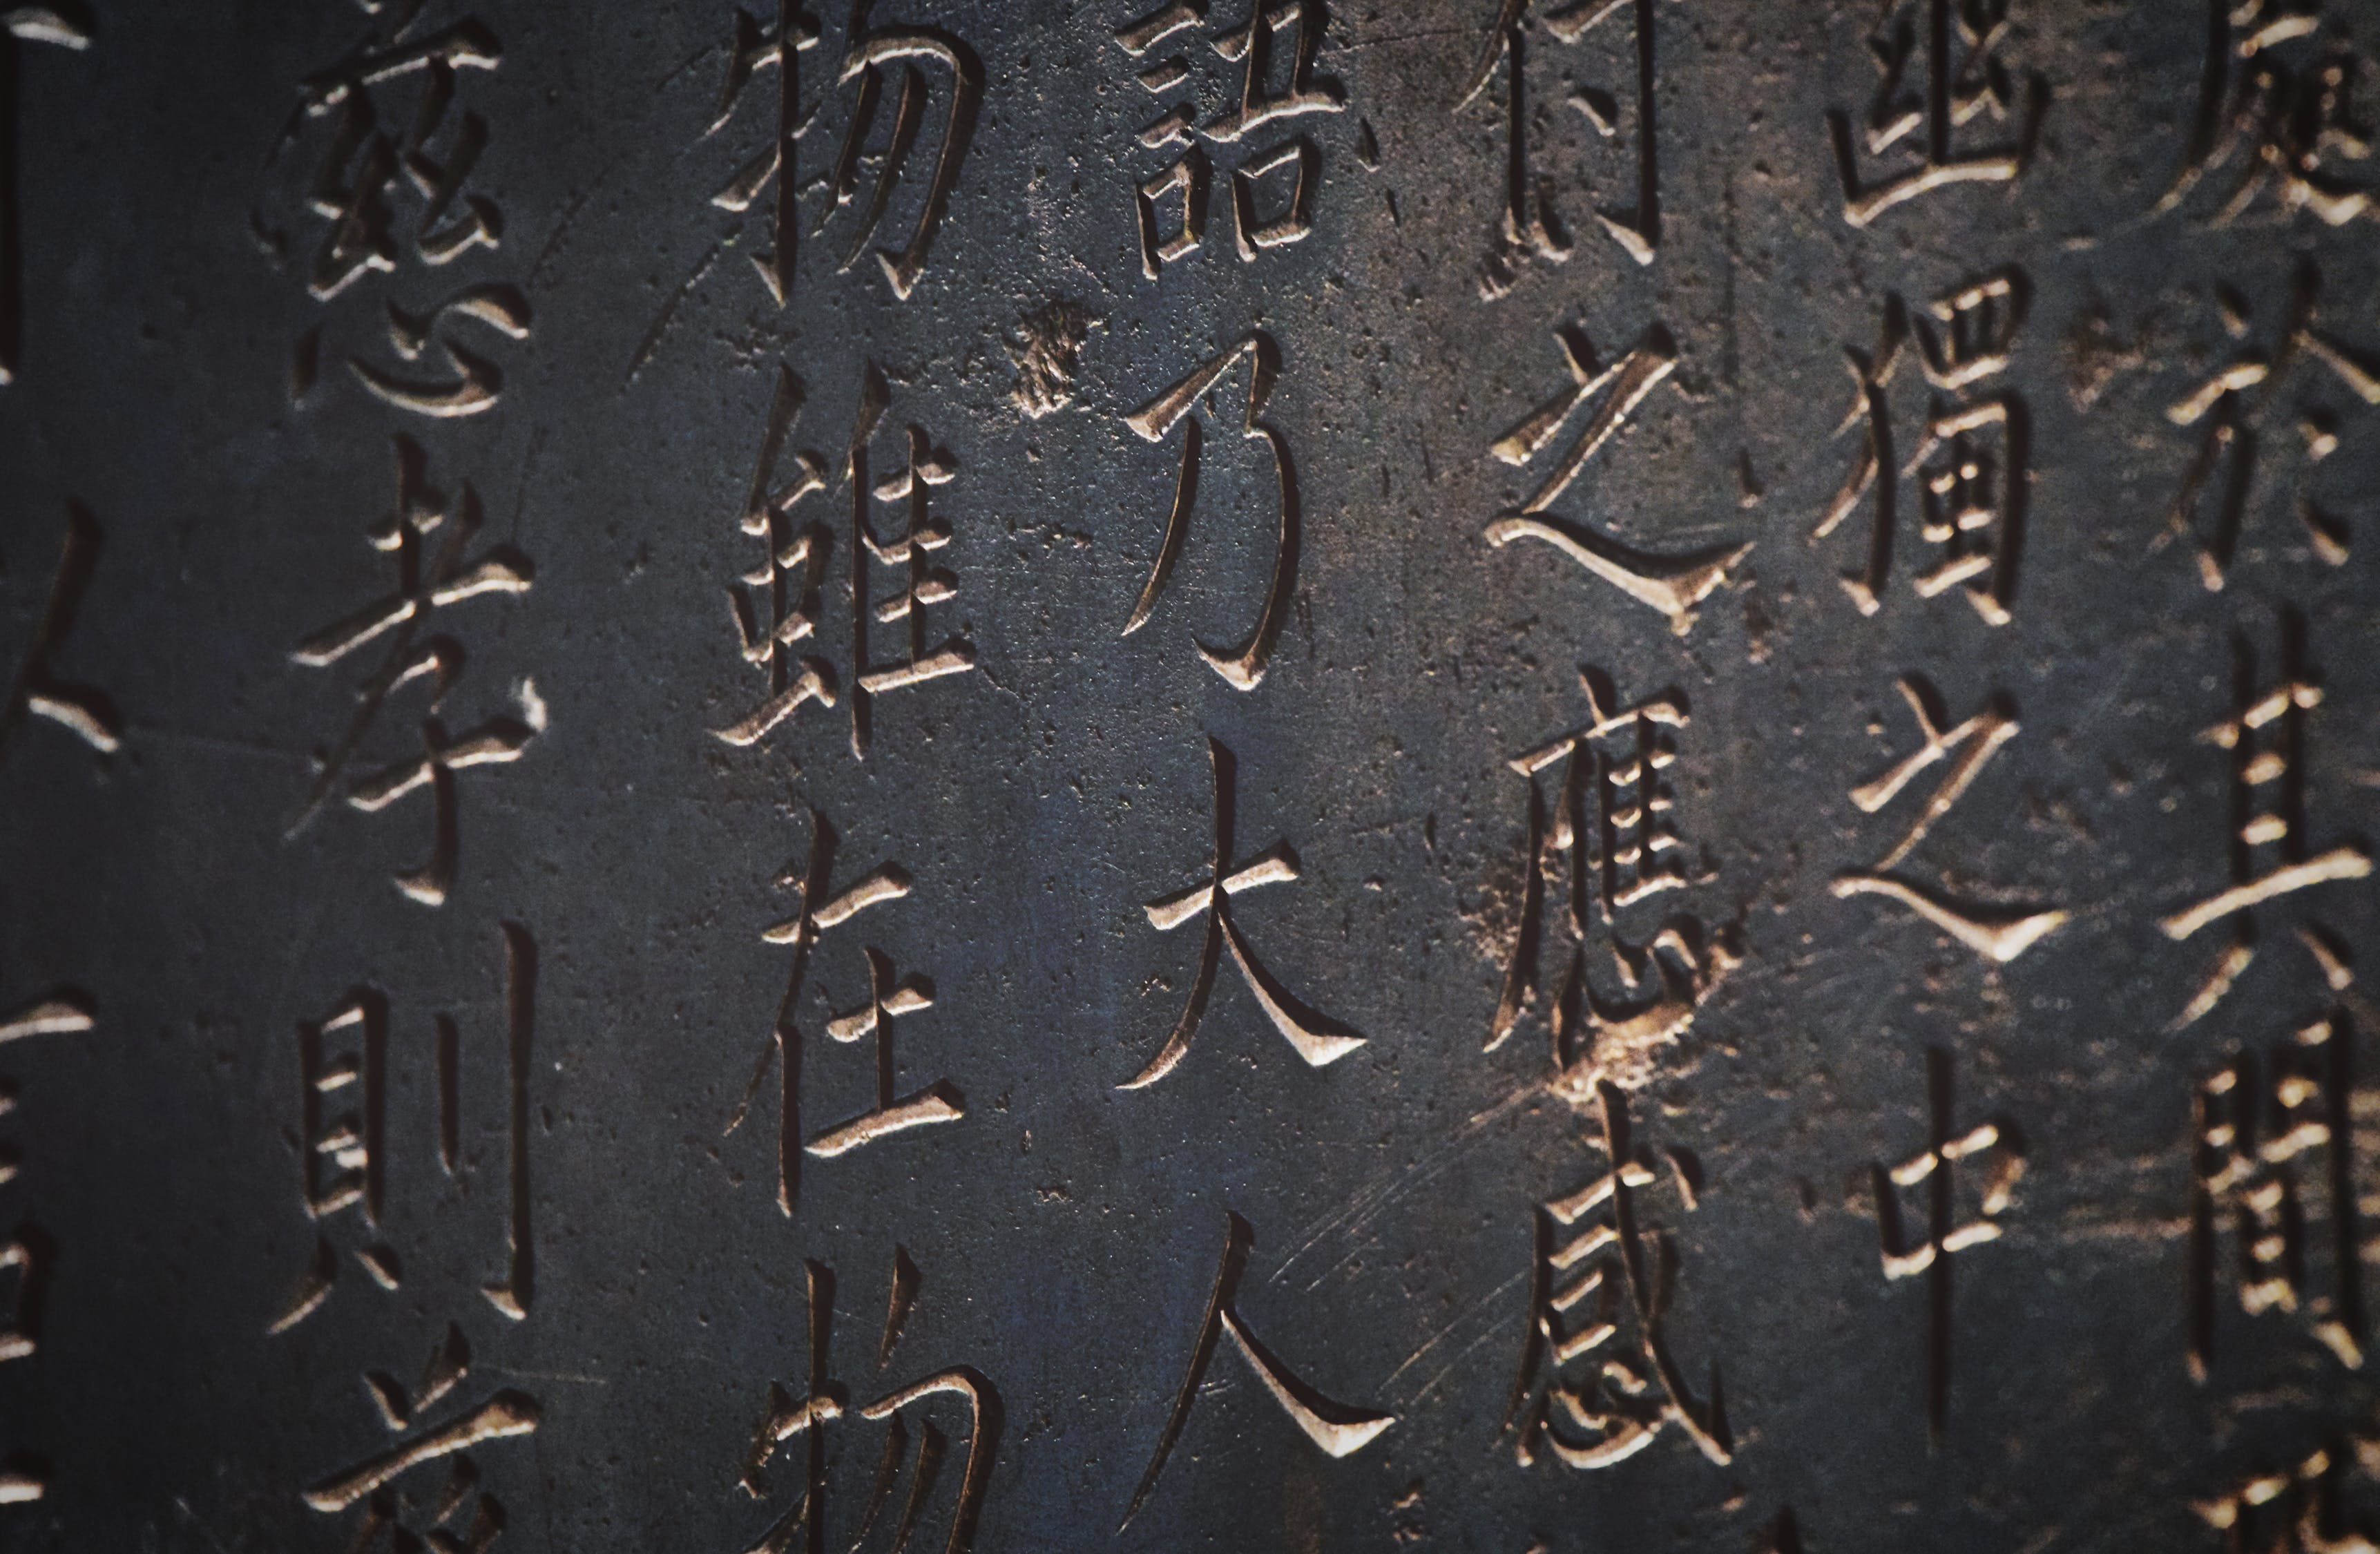 Chinese characters embossed on metal